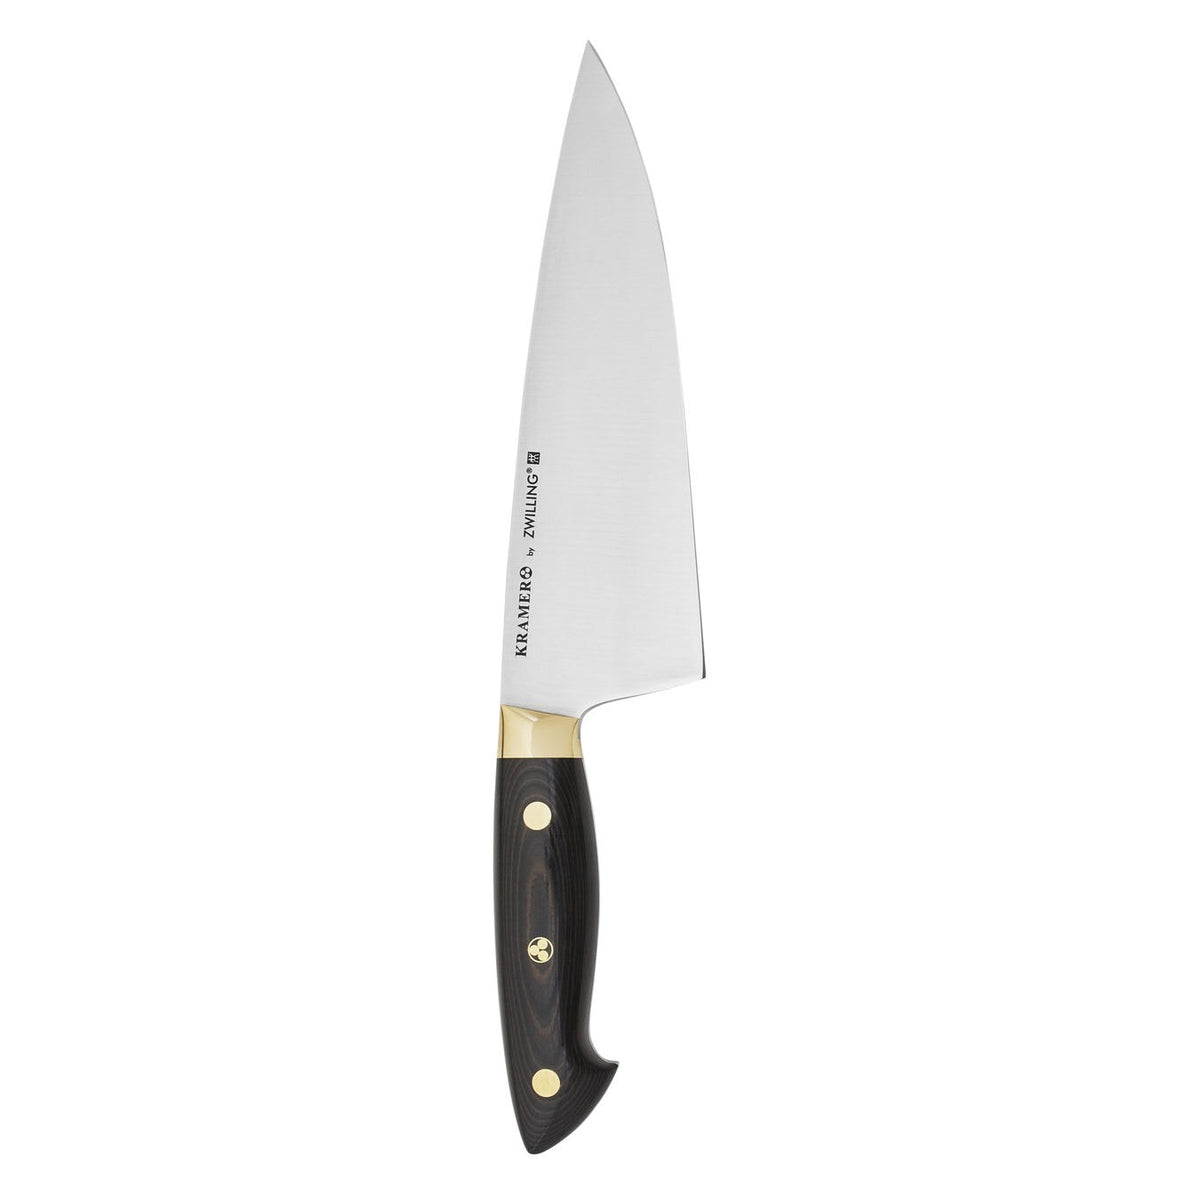 KRAMER by ZWILLING EUROLINE Carbon Collection 2.0 6-inch Chef's